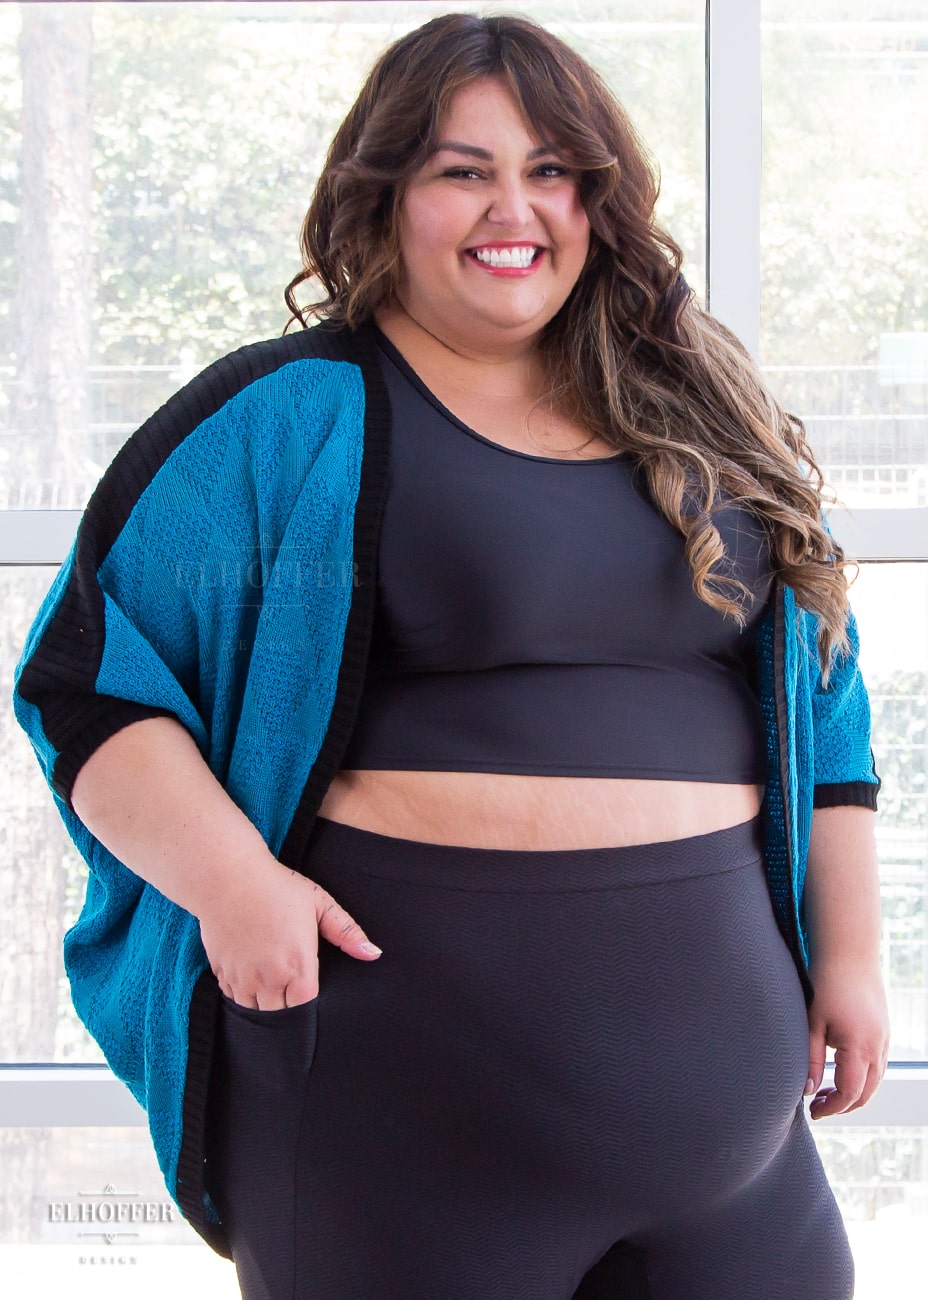 Kristen, a size 3XL olive skinned model with long highlighted brown hair, is wearing a teal open front dolman shrug featuring black ribbed shoulder detailing.